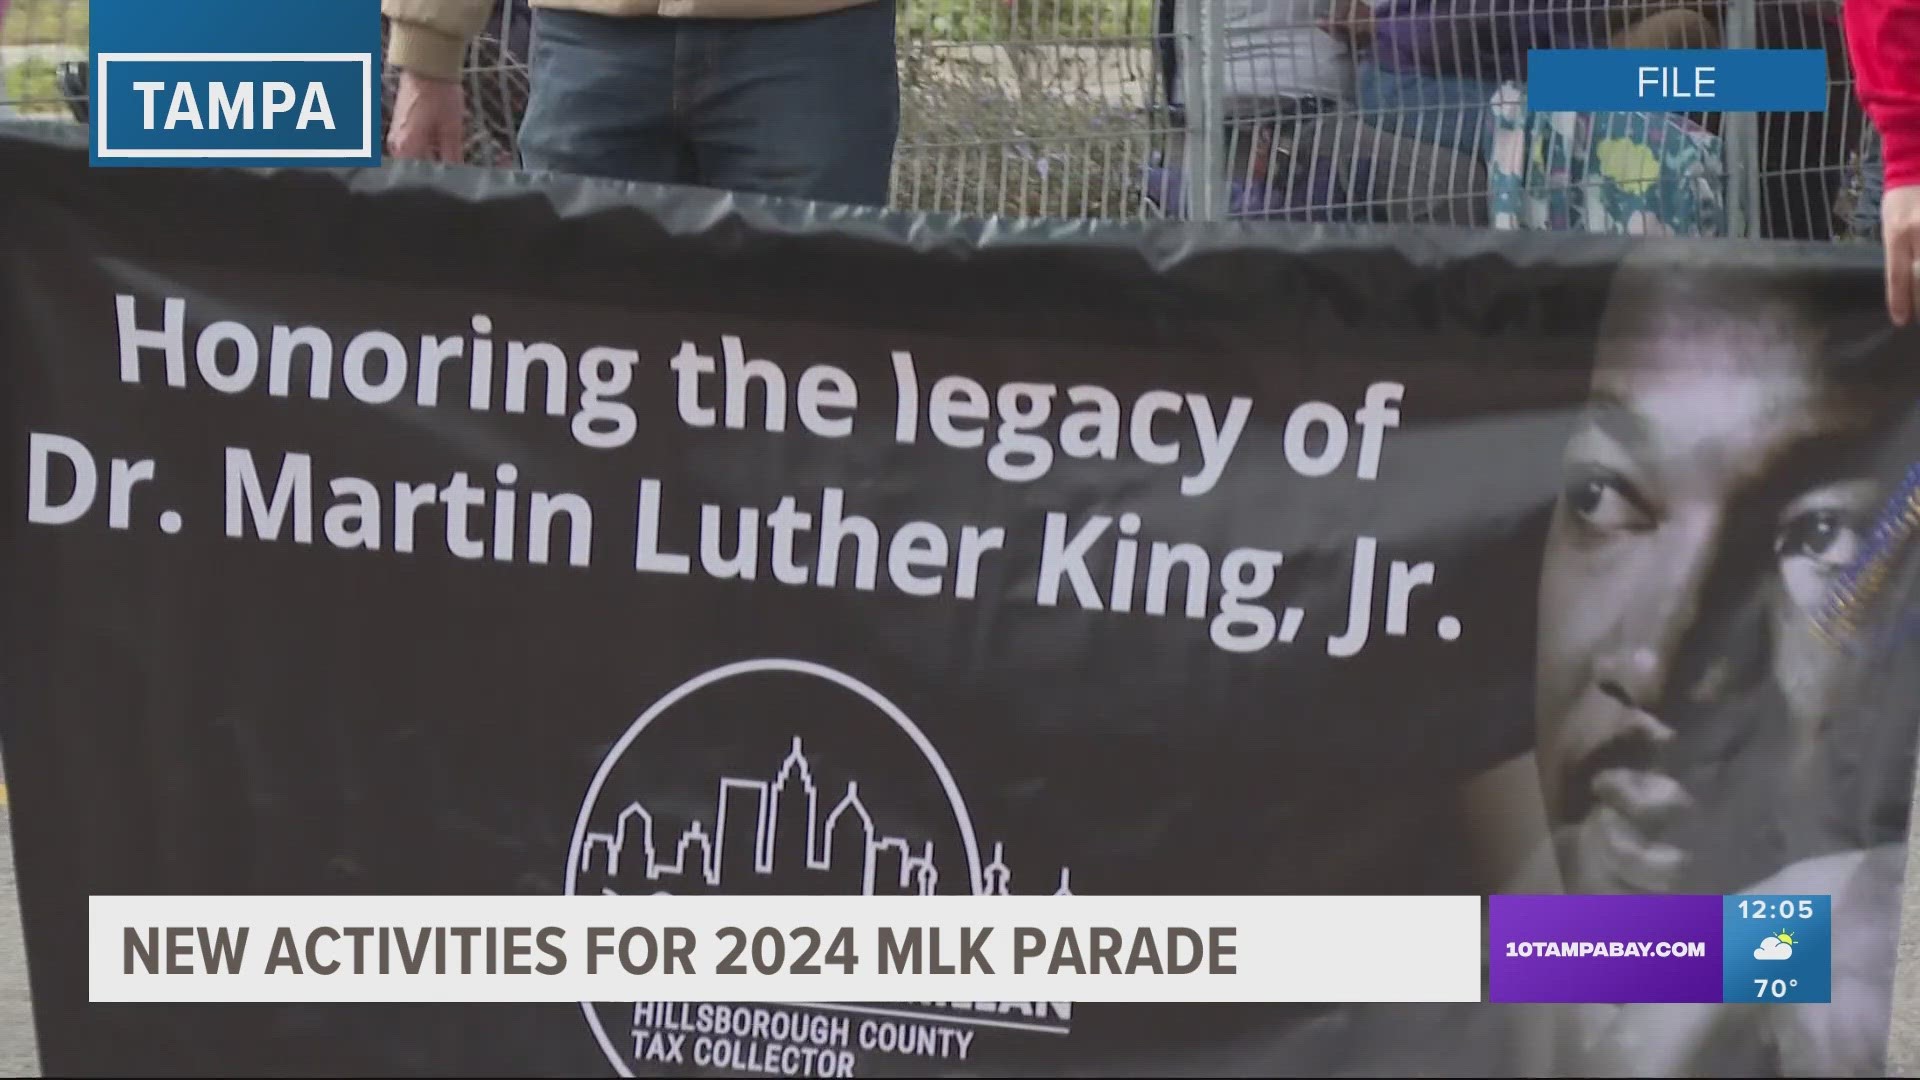 New activities announced for 2024 MLK Parade